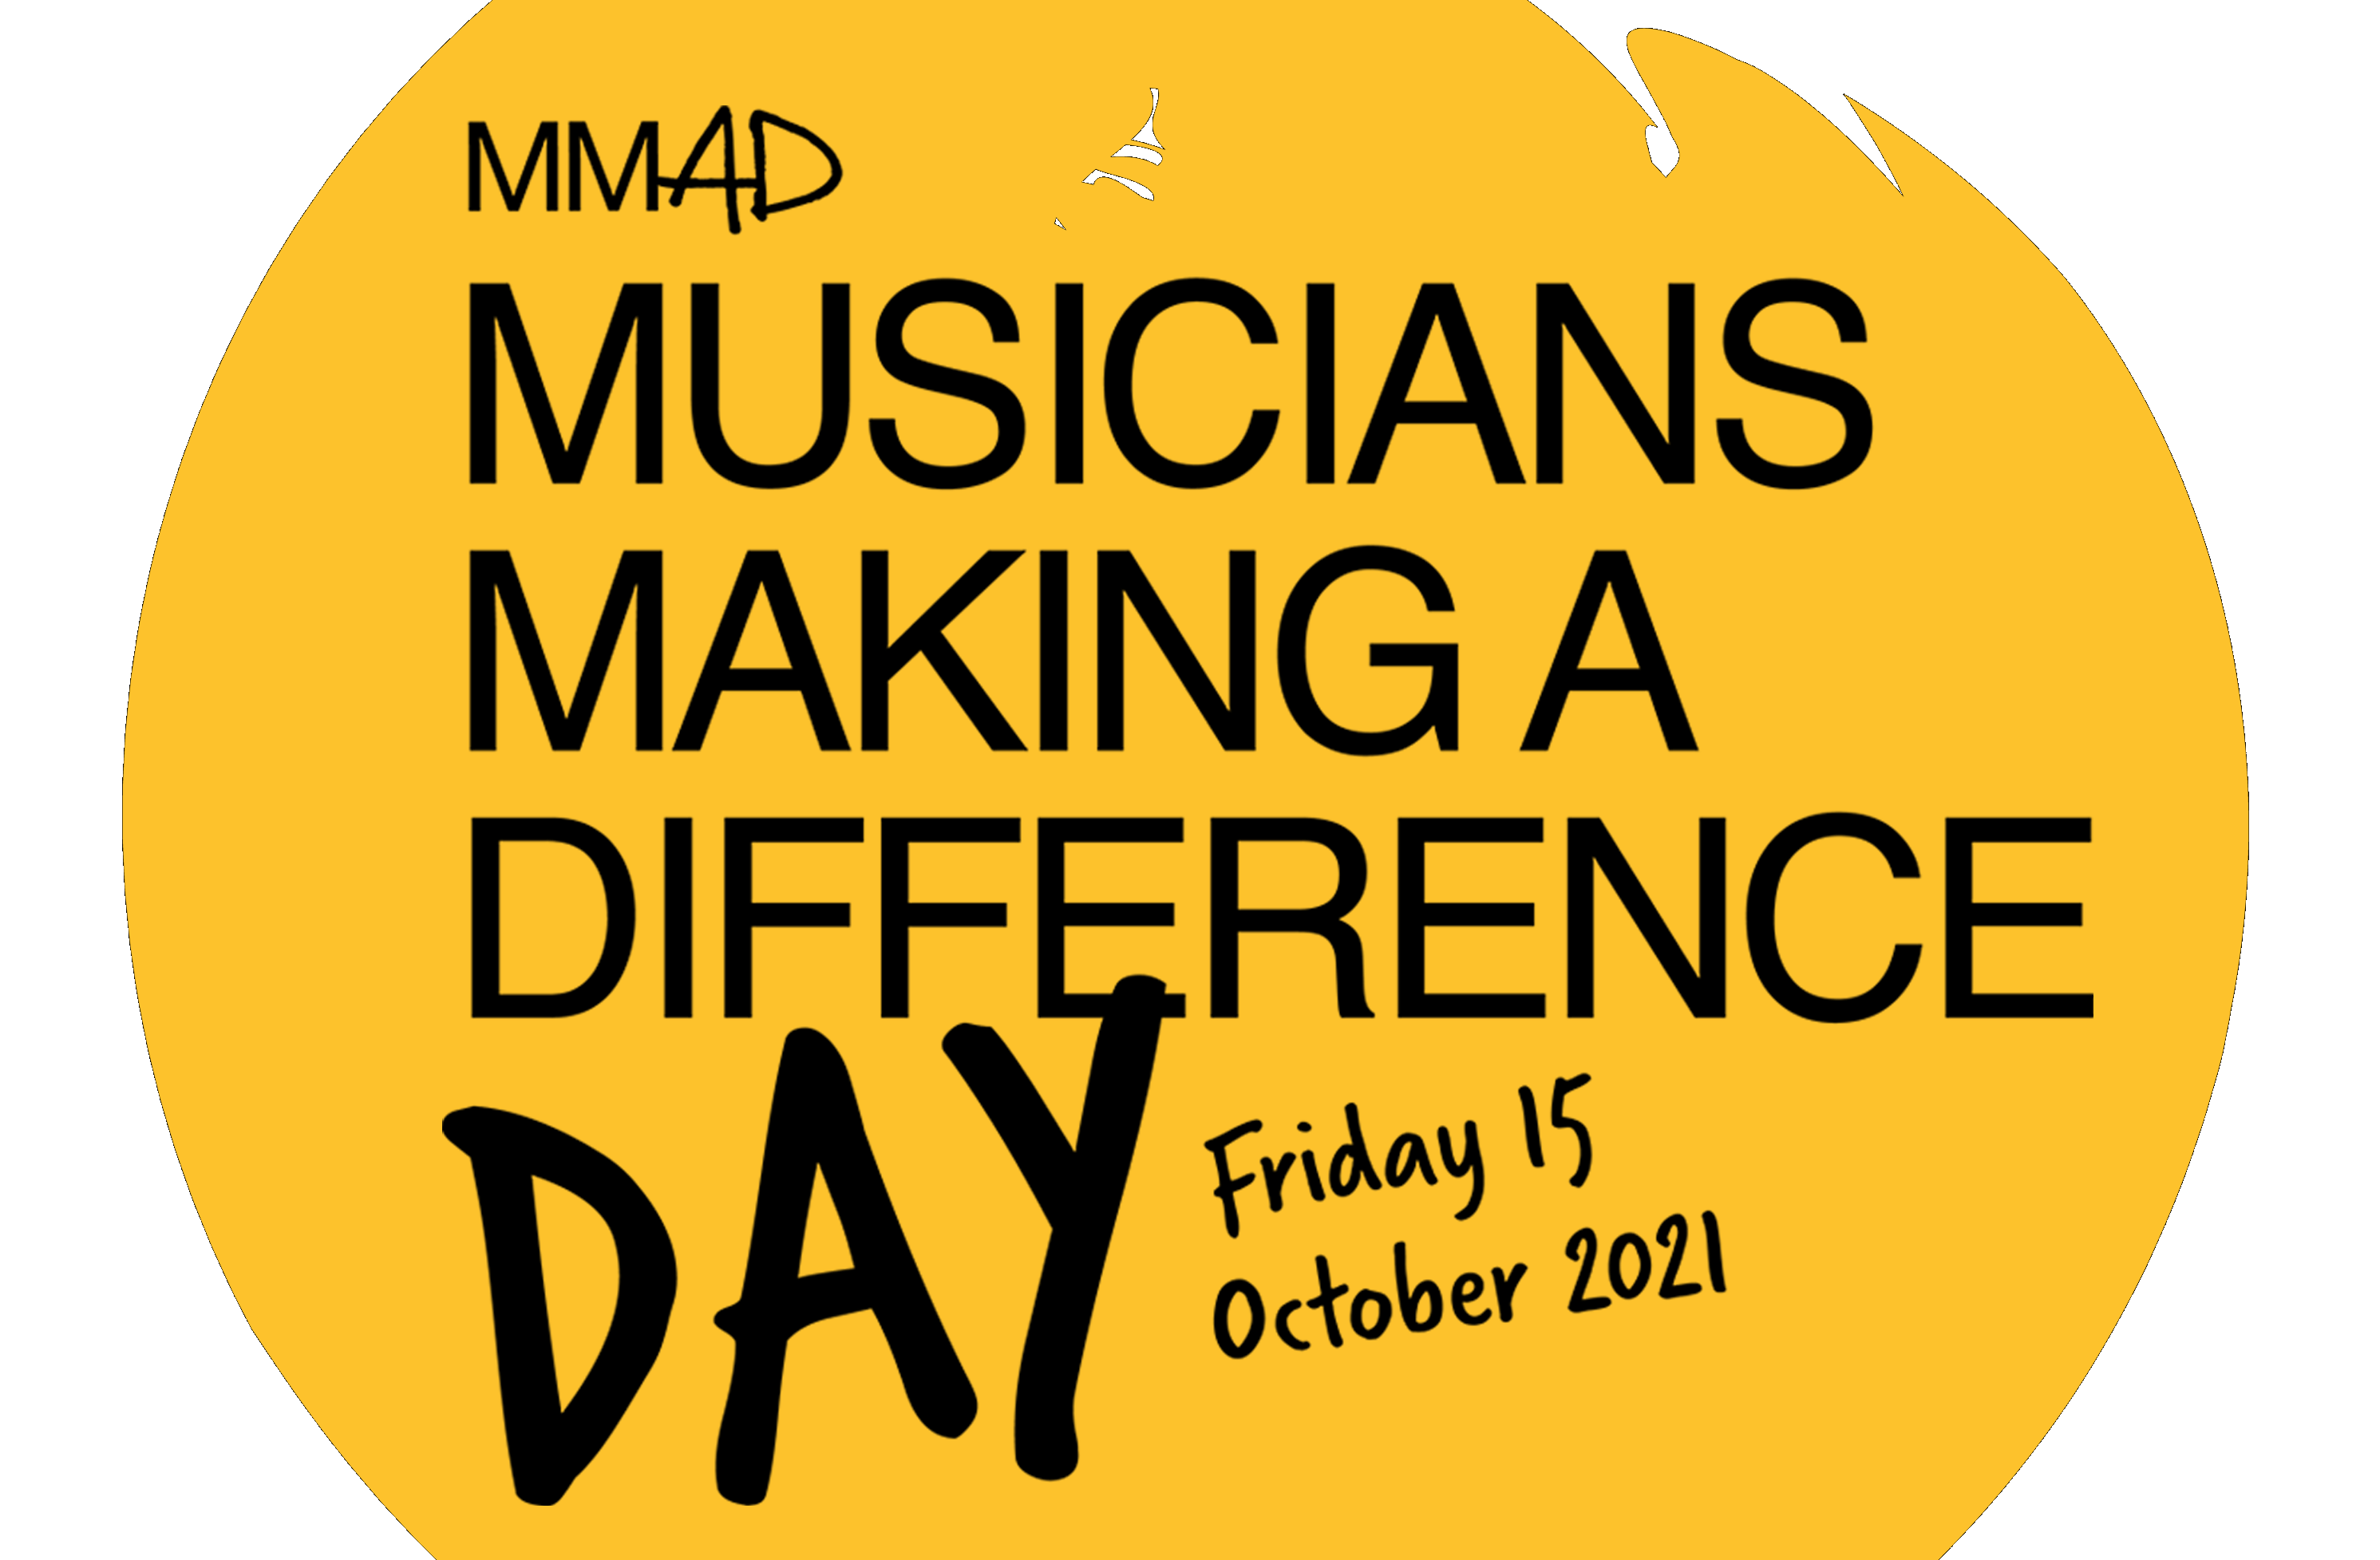 Musicians Making A Difference Day back for seventh year